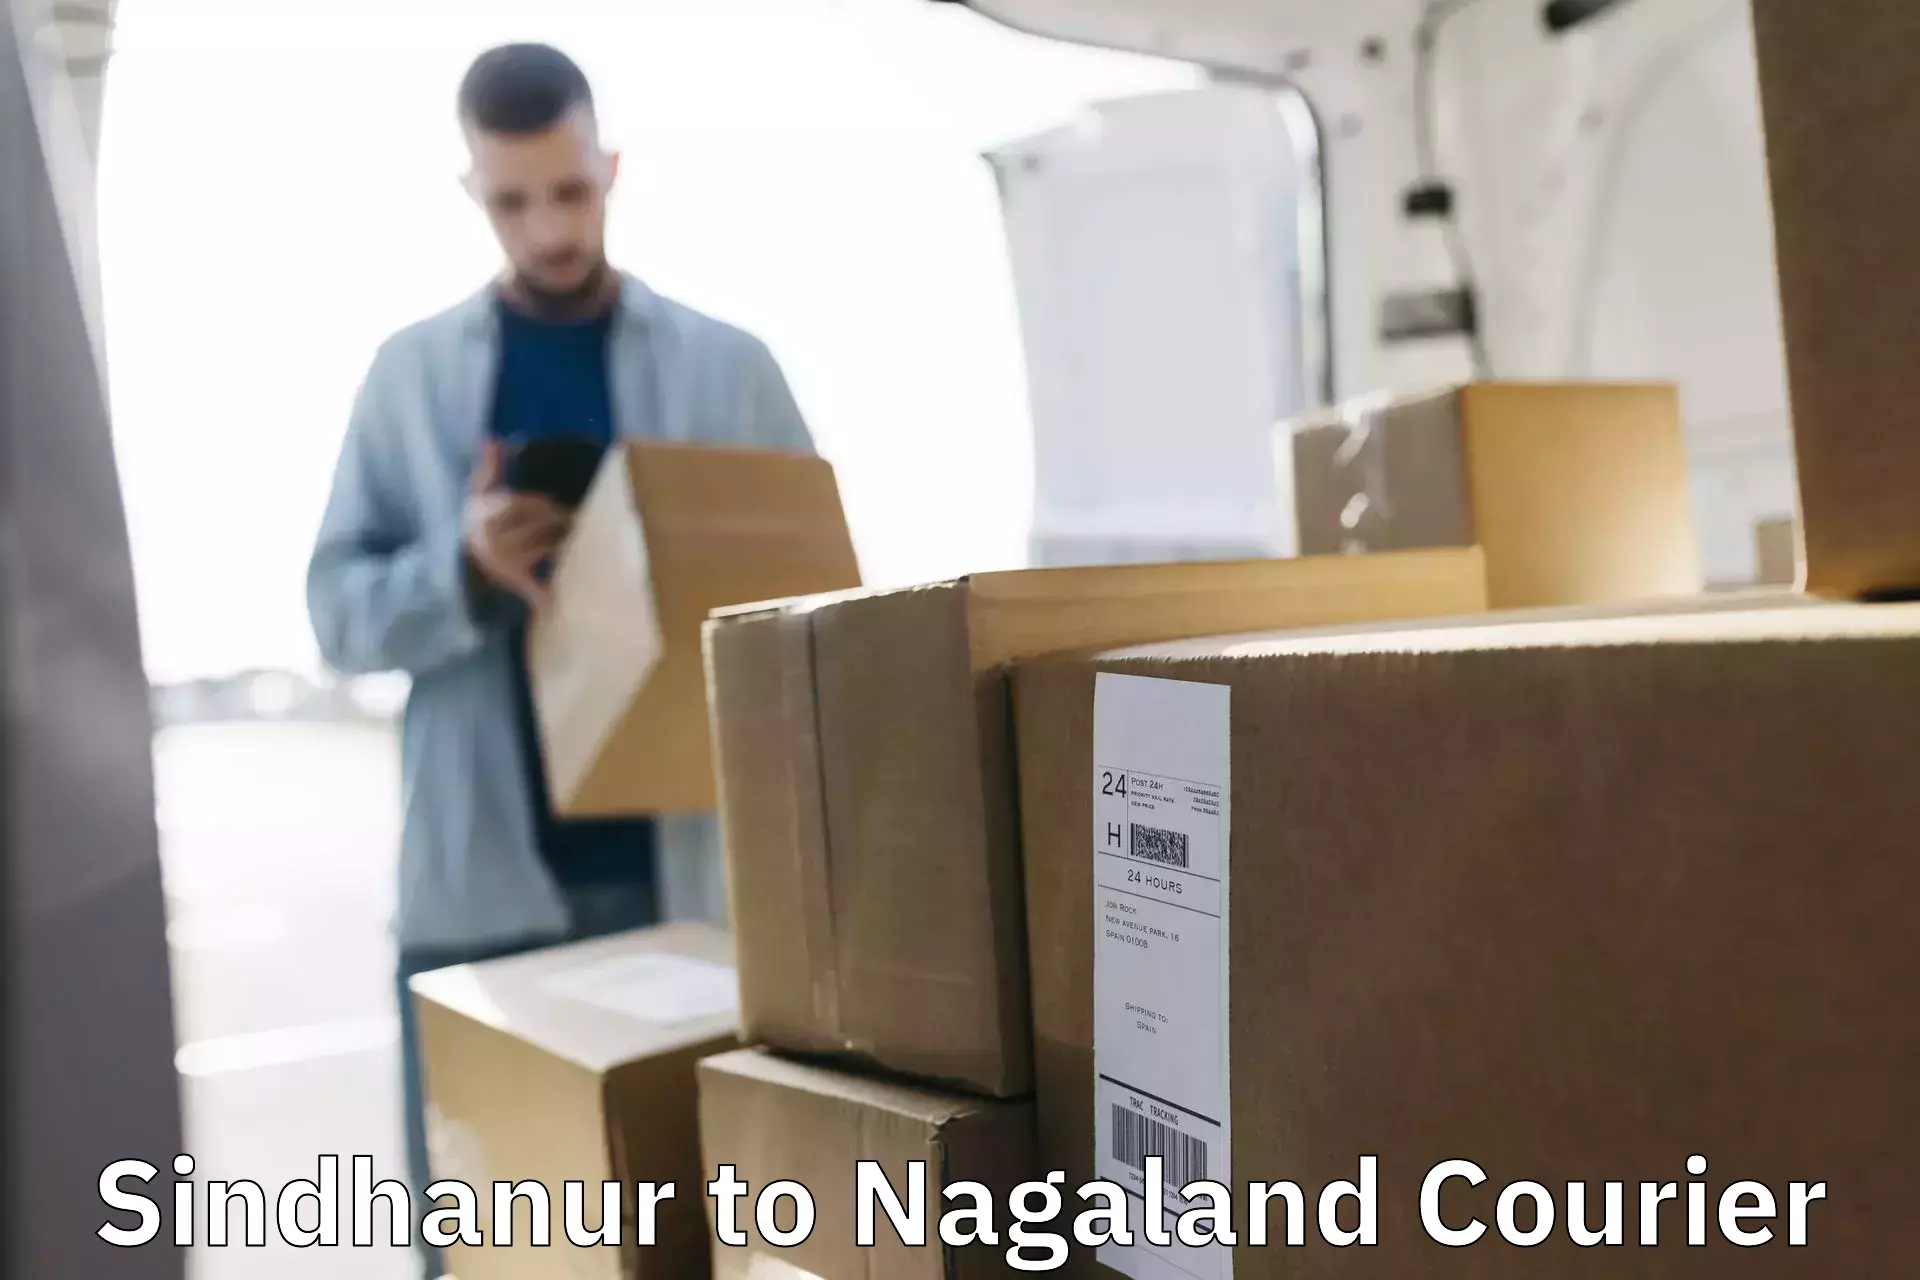 Reliable courier service Sindhanur to Nagaland